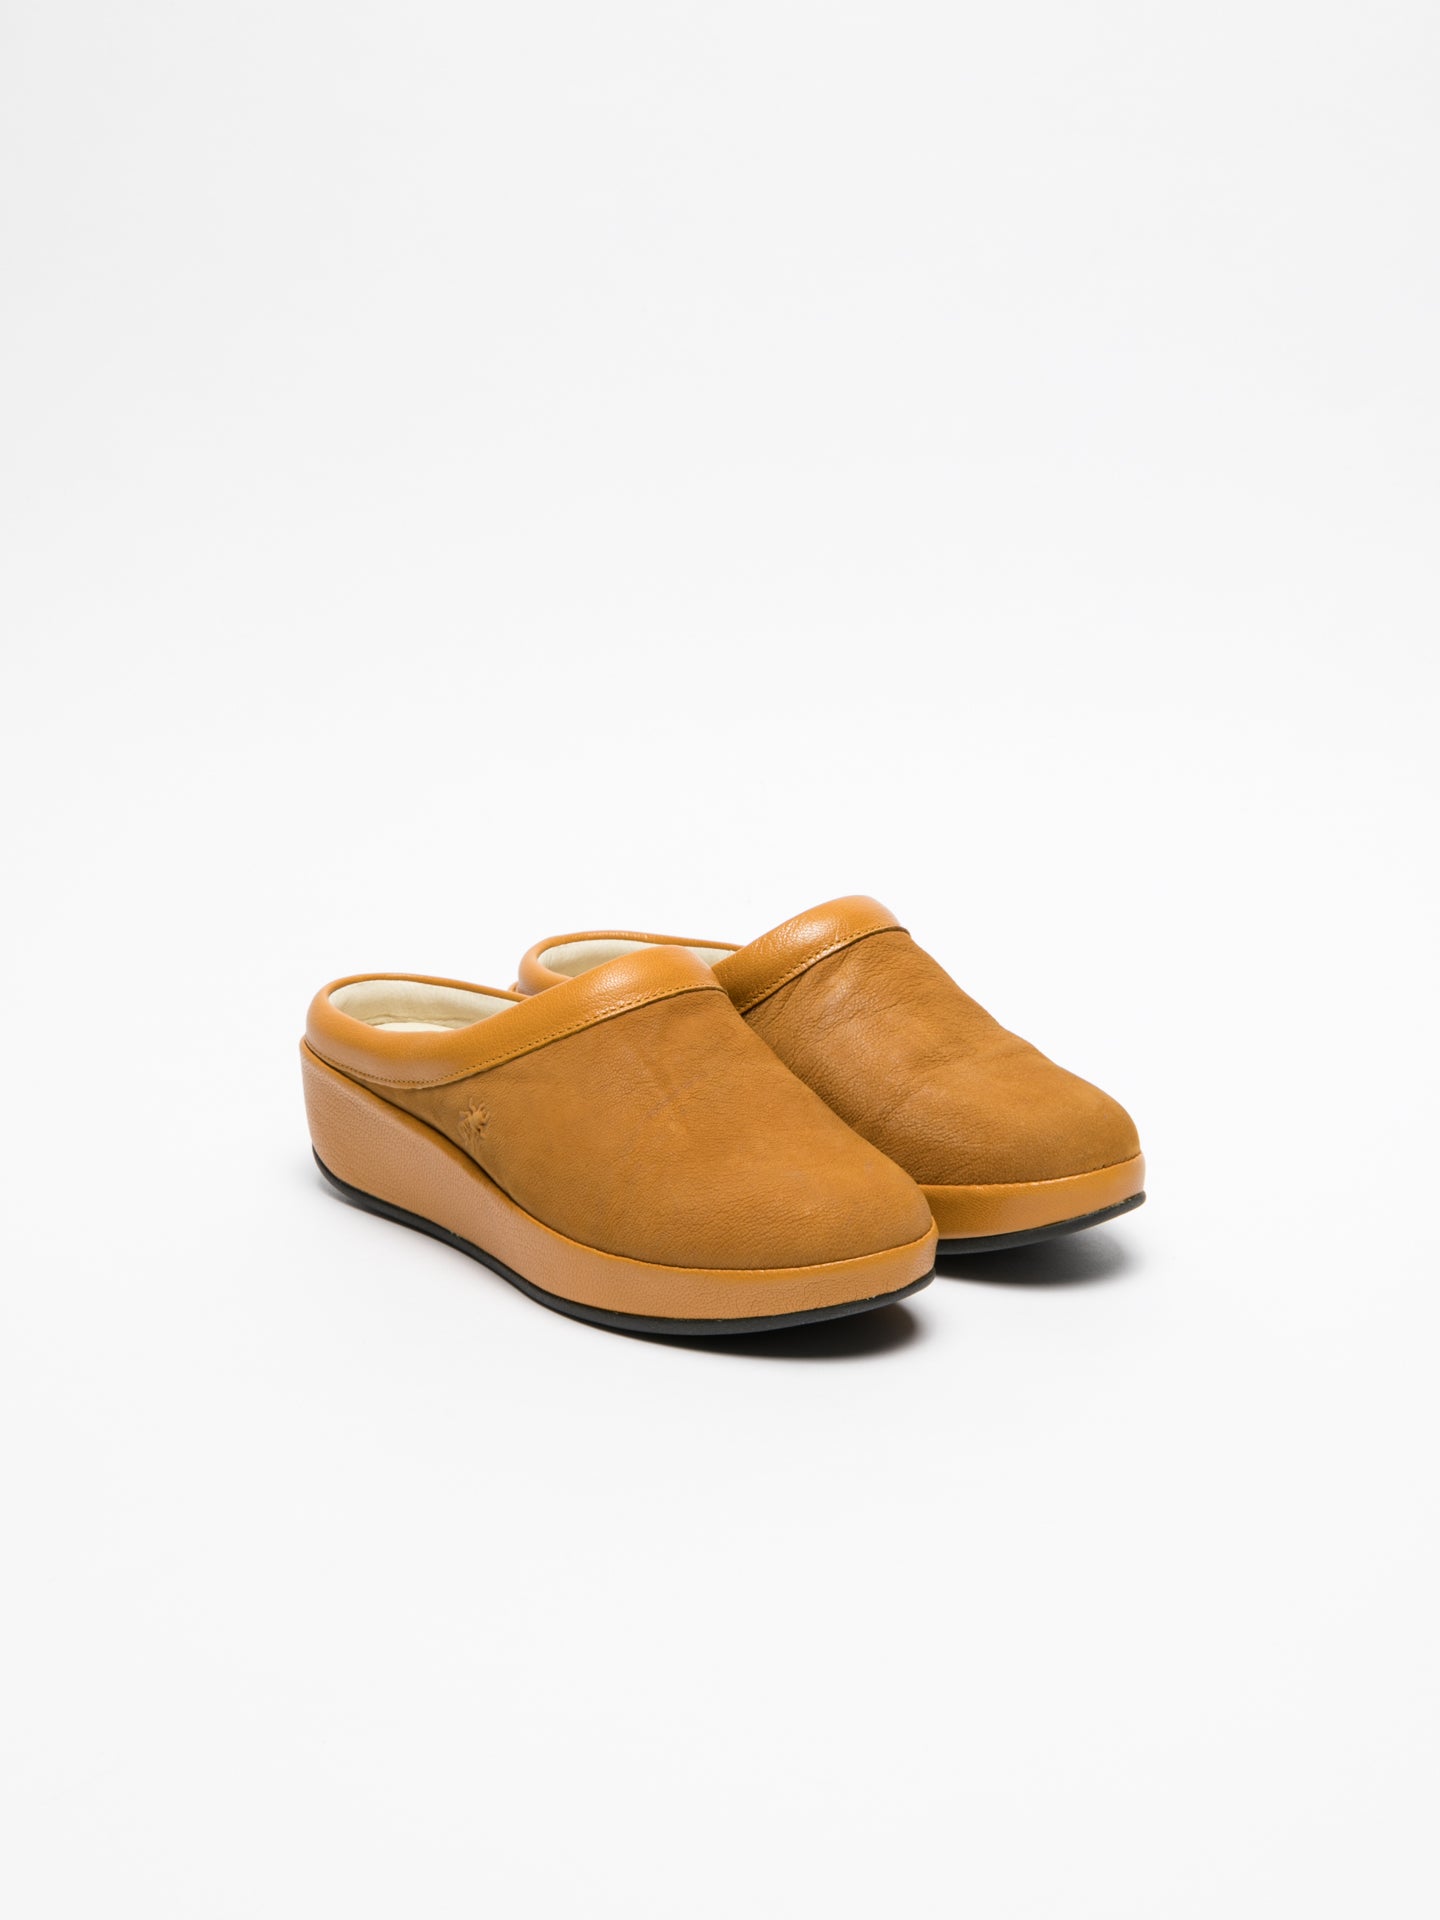 Fly London Yellow Round Toe Mules